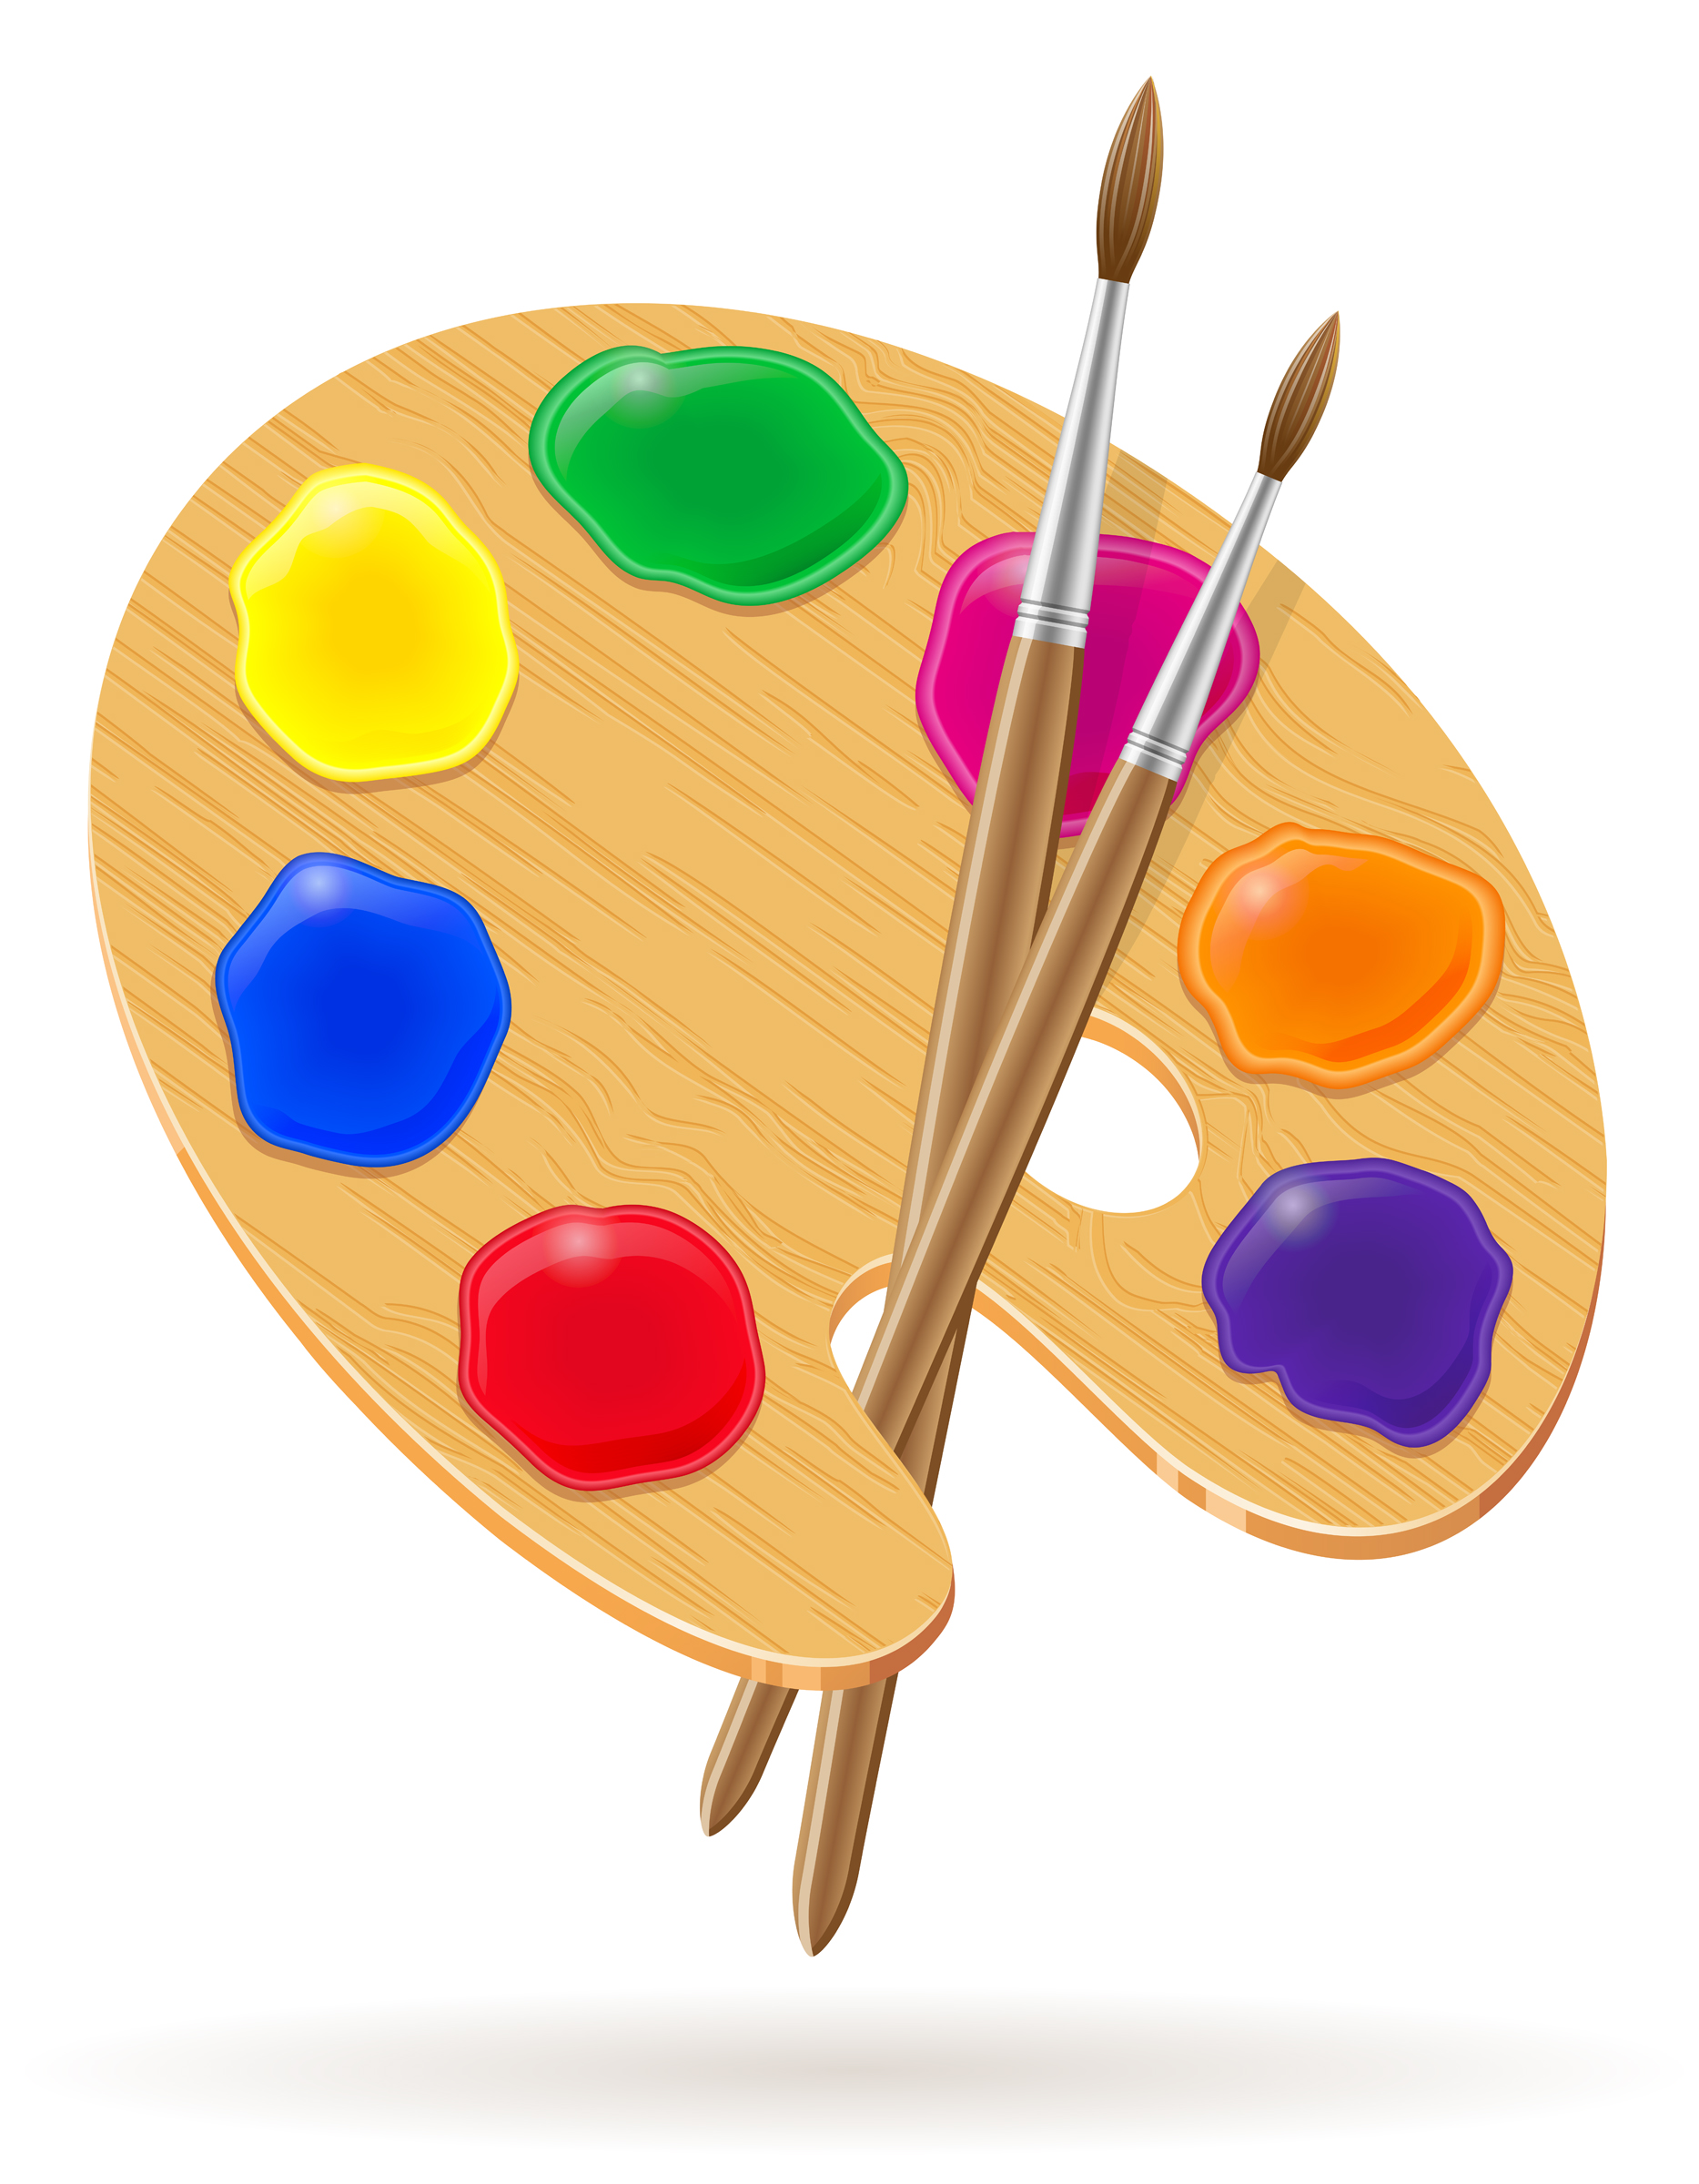 Artist's palette with paintbrushes.